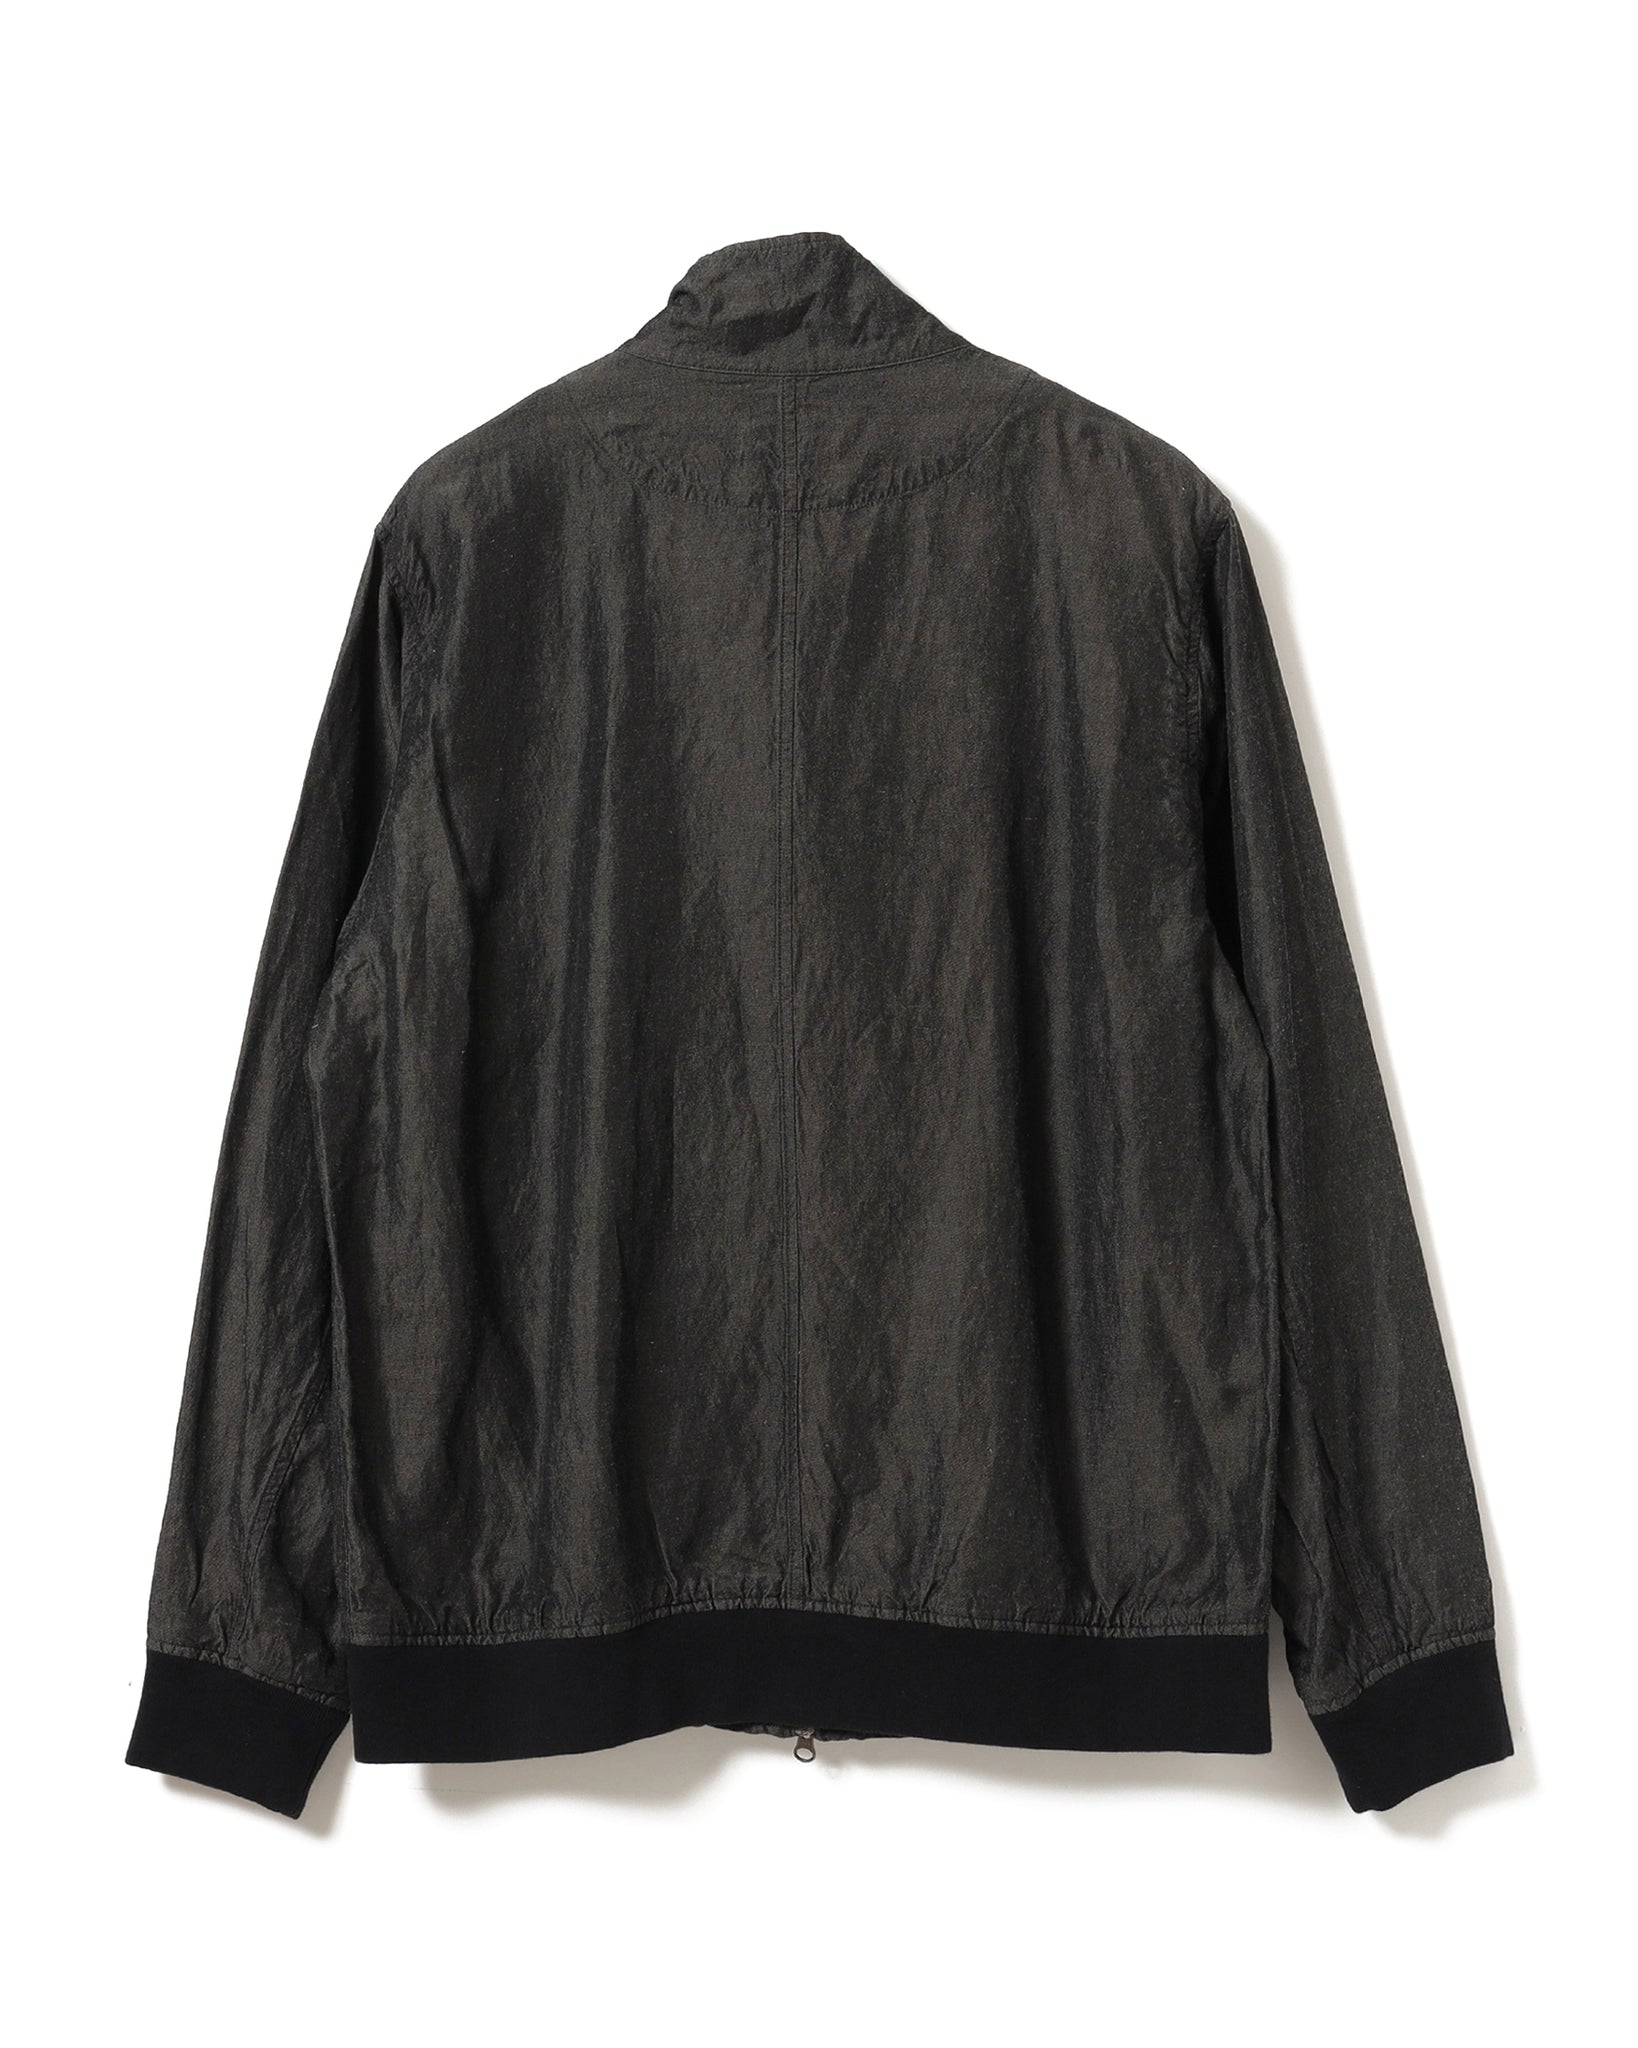 Anderson Bomber Jacket